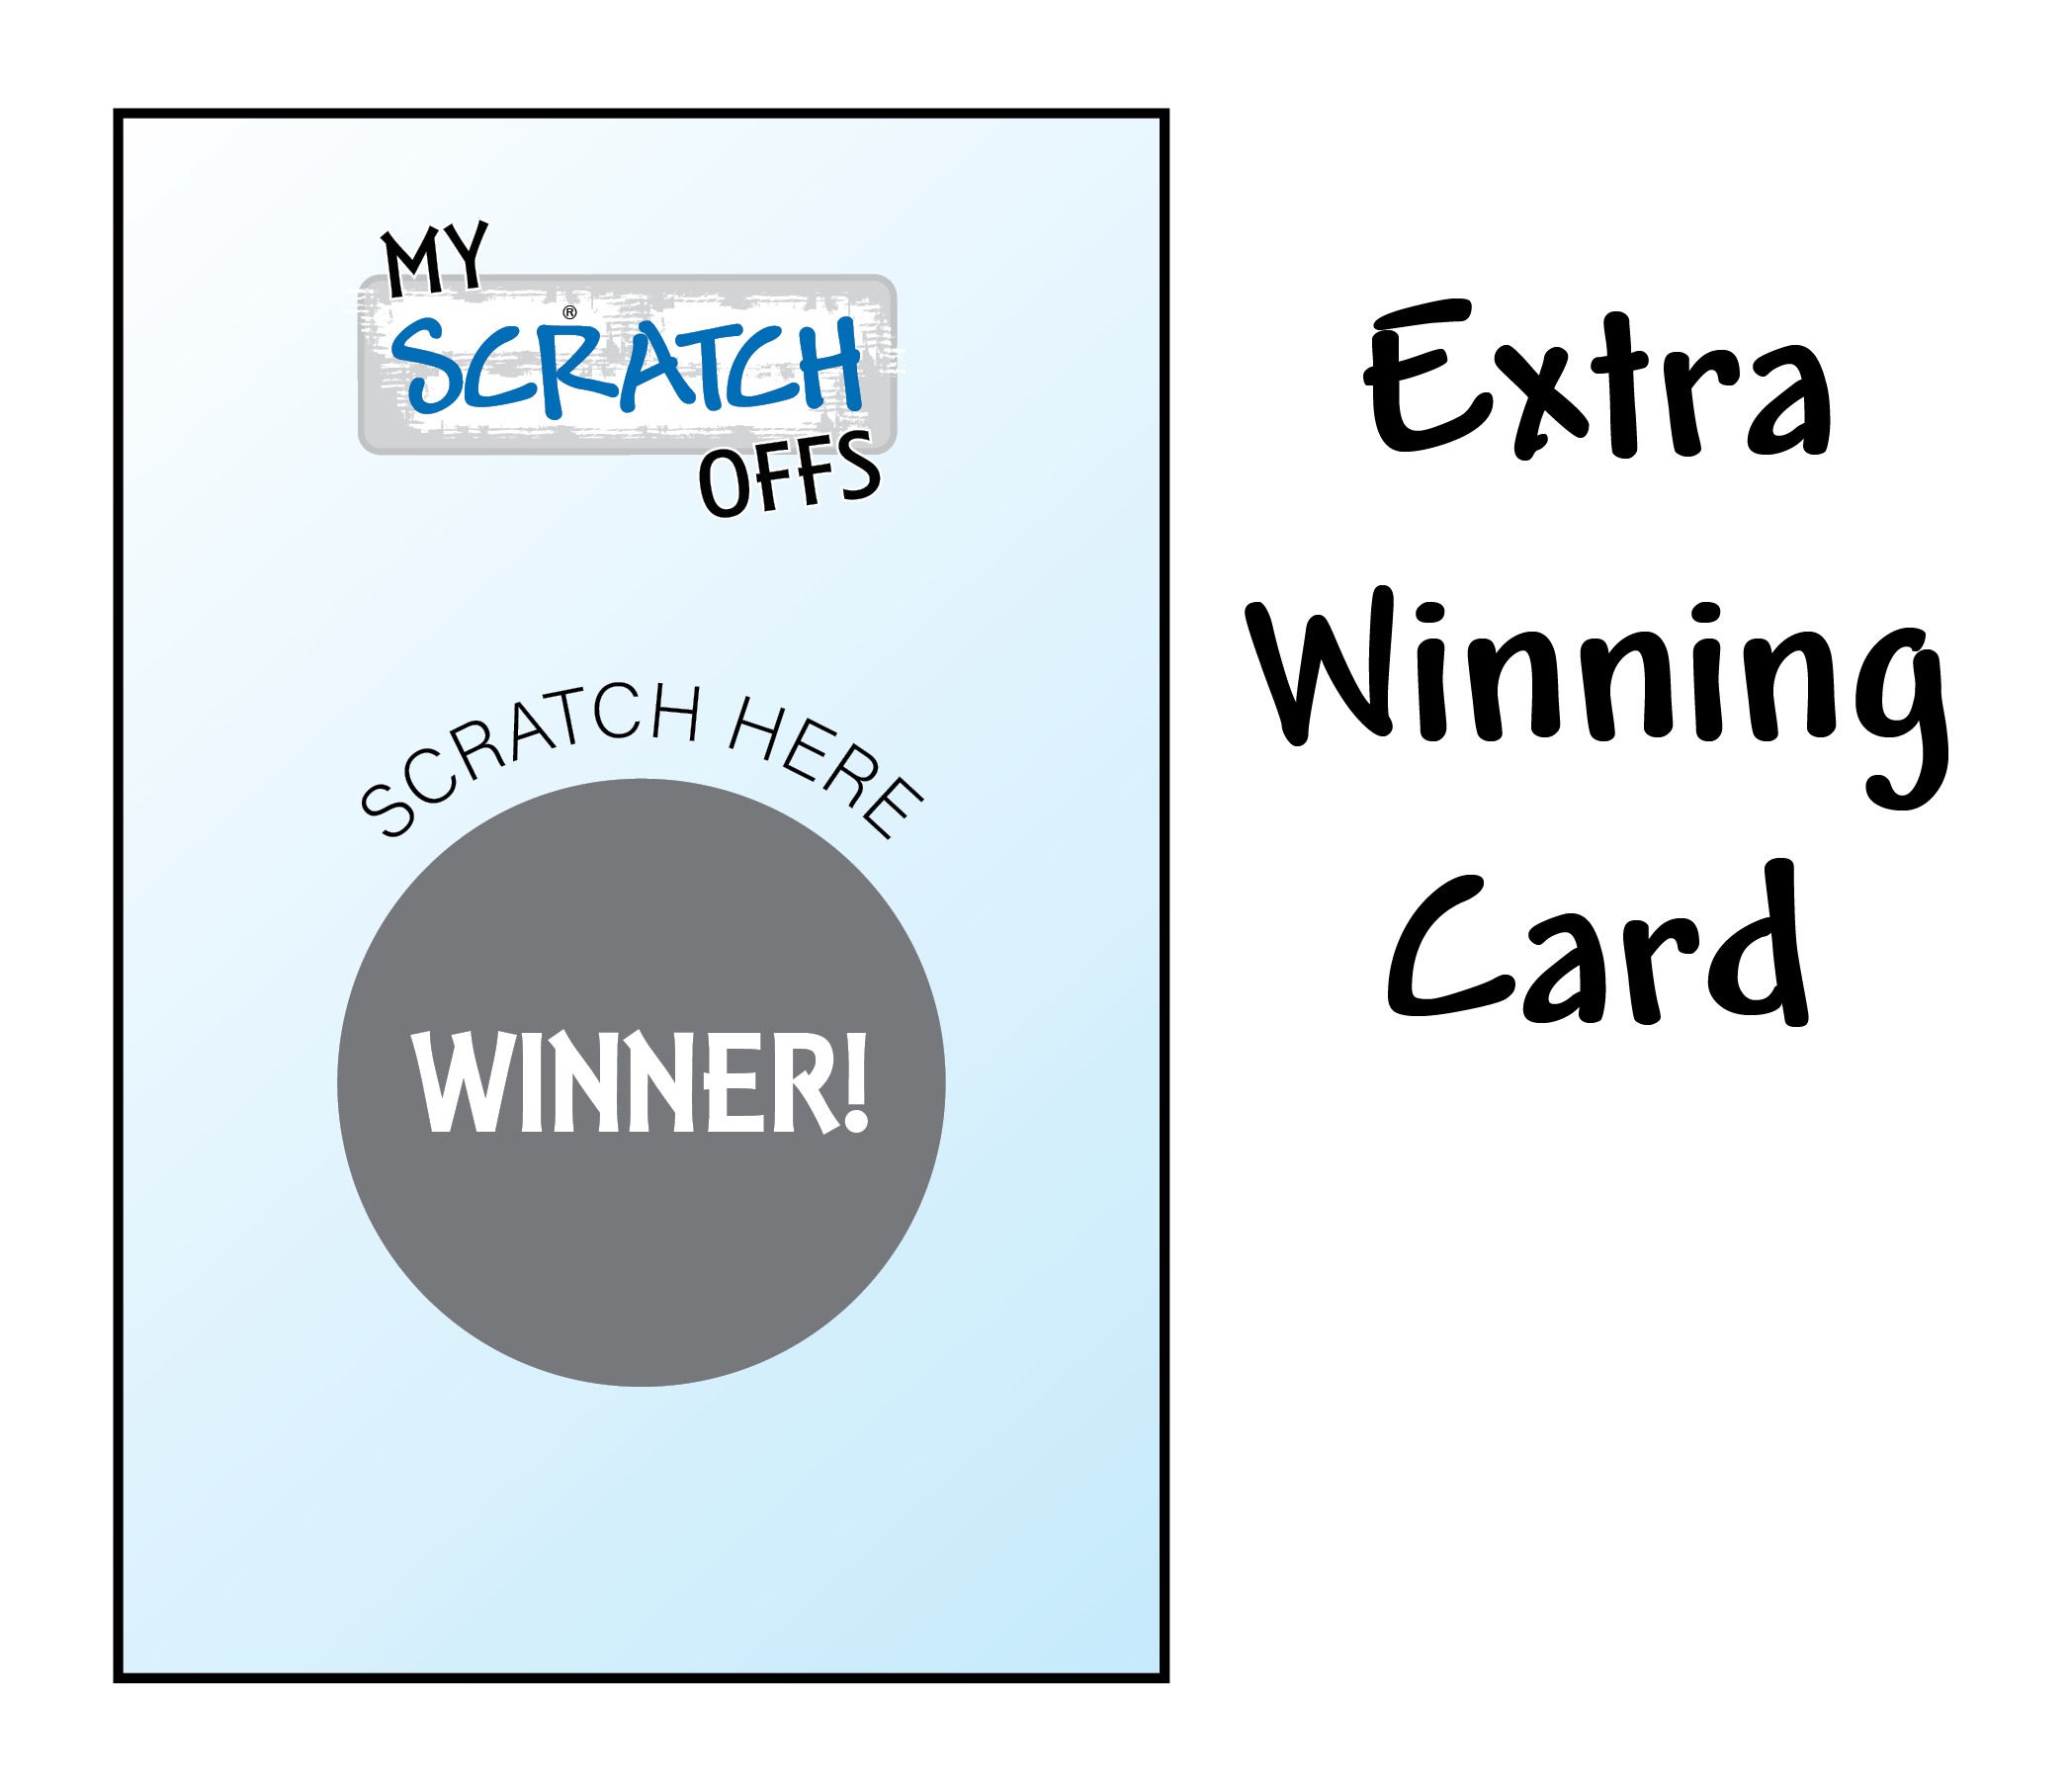 Extra Winning Card - All-Occasion - My Scratch Offs